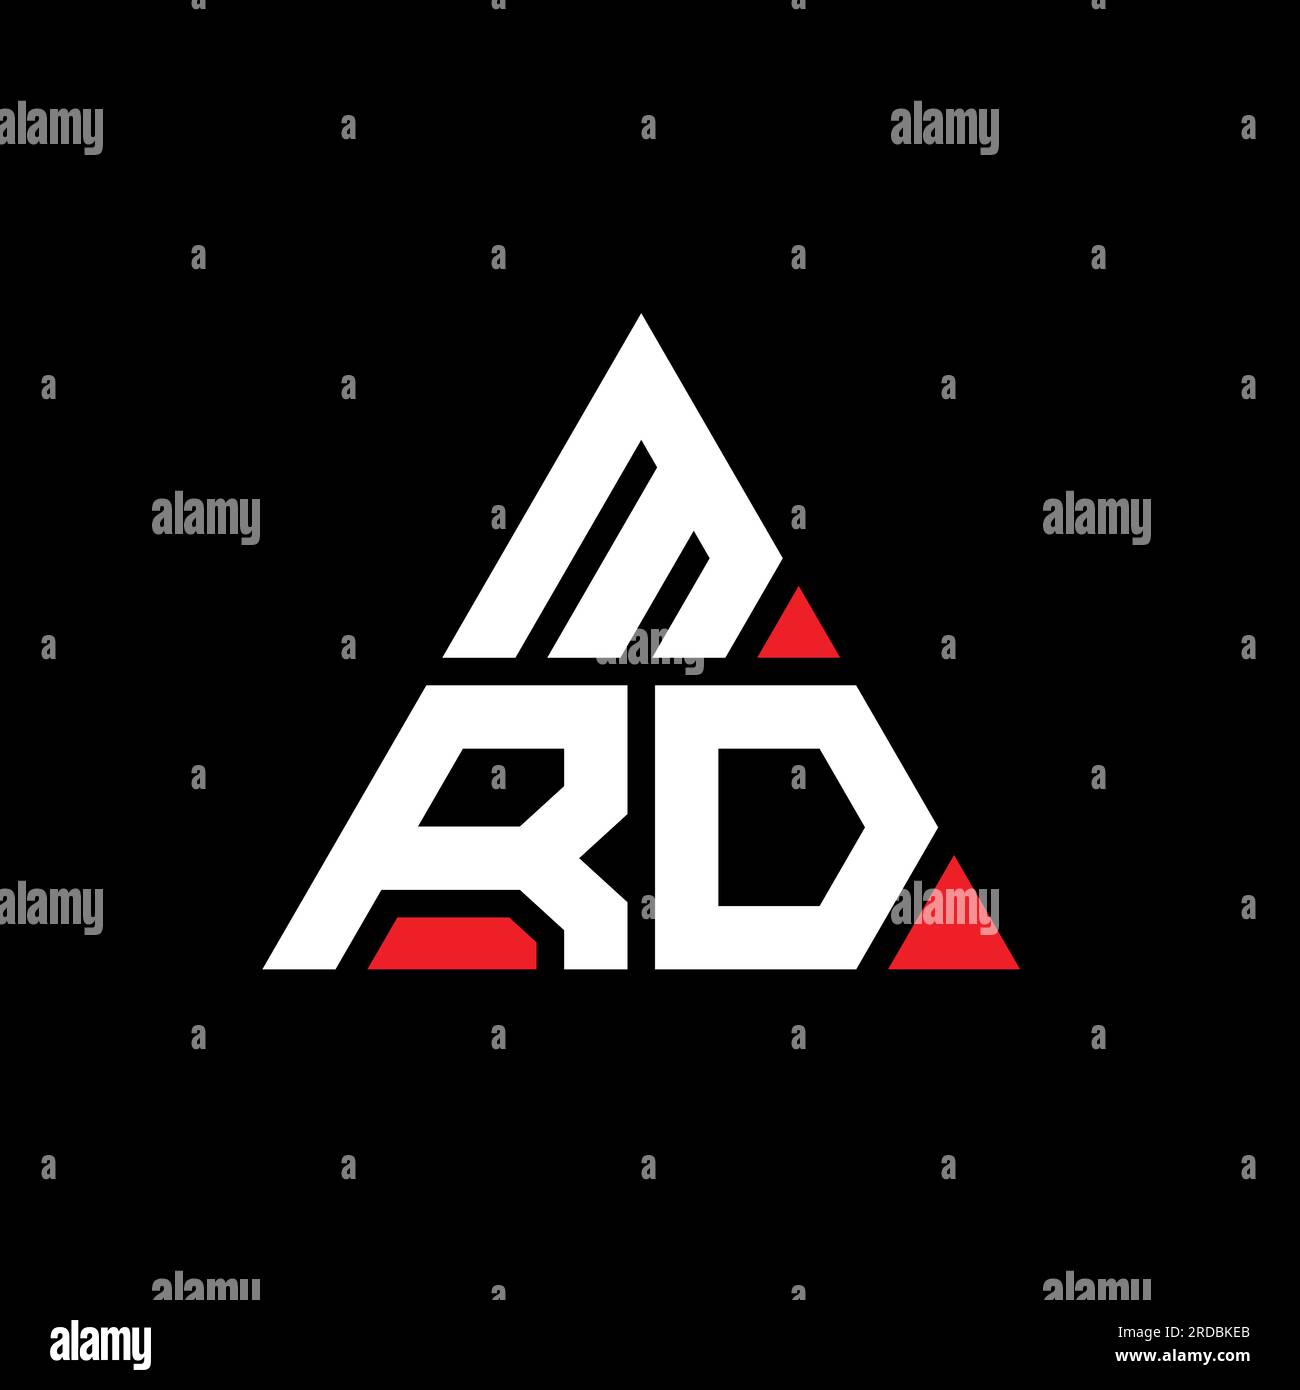 Mrd triangle Stock Vector Images - Alamy